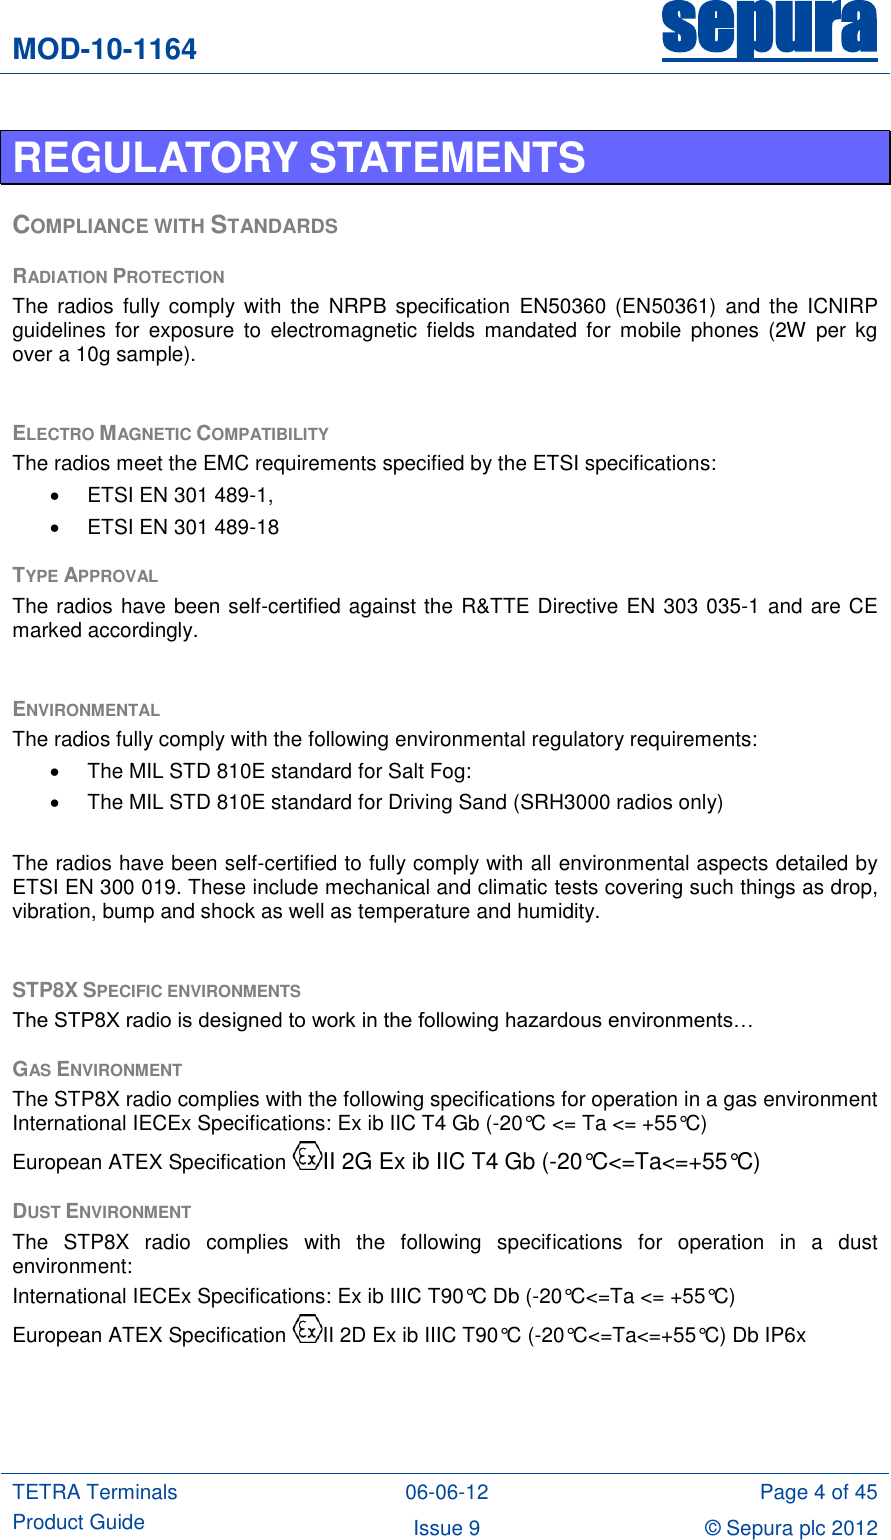 MOD-10-1164 sepura  TETRA Terminals Product Guide 06-06-12 Page 4 of 45 Issue 9 © Sepura plc 2012   REGULATORY STATEMENTS COMPLIANCE WITH STANDARDS RADIATION PROTECTION The  radios  fully comply  with  the  NRPB  specification  EN50360  (EN50361)  and  the  ICNIRP guidelines  for  exposure  to  electromagnetic  fields  mandated  for  mobile  phones  (2W  per  kg over a 10g sample).  ELECTRO MAGNETIC COMPATIBILITY The radios meet the EMC requirements specified by the ETSI specifications:   ETSI EN 301 489-1,   ETSI EN 301 489-18 TYPE APPROVAL The radios have been self-certified against the R&amp;TTE Directive EN 303 035-1 and are CE marked accordingly.  ENVIRONMENTAL The radios fully comply with the following environmental regulatory requirements:   The MIL STD 810E standard for Salt Fog:   The MIL STD 810E standard for Driving Sand (SRH3000 radios only)  The radios have been self-certified to fully comply with all environmental aspects detailed by ETSI EN 300 019. These include mechanical and climatic tests covering such things as drop, vibration, bump and shock as well as temperature and humidity.  STP8X SPECIFIC ENVIRONMENTS The STP8X radio is designed to work in the following hazardous environments… GAS ENVIRONMENT The STP8X radio complies with the following specifications for operation in a gas environment International IECEx Specifications: Ex ib IIC T4 Gb (-20°C &lt;= Ta &lt;= +55°C)  European ATEX Specification  II 2G Ex ib IIC T4 Gb (-20°C&lt;=Ta&lt;=+55°C) DUST ENVIRONMENT The  STP8X  radio  complies  with  the  following  specifications  for  operation  in  a  dust environment: International IECEx Specifications: Ex ib IIIC T90°C Db (-20°C&lt;=Ta &lt;= +55°C)  European ATEX Specification  II 2D Ex ib IIIC T90°C (-20°C&lt;=Ta&lt;=+55°C) Db IP6x   